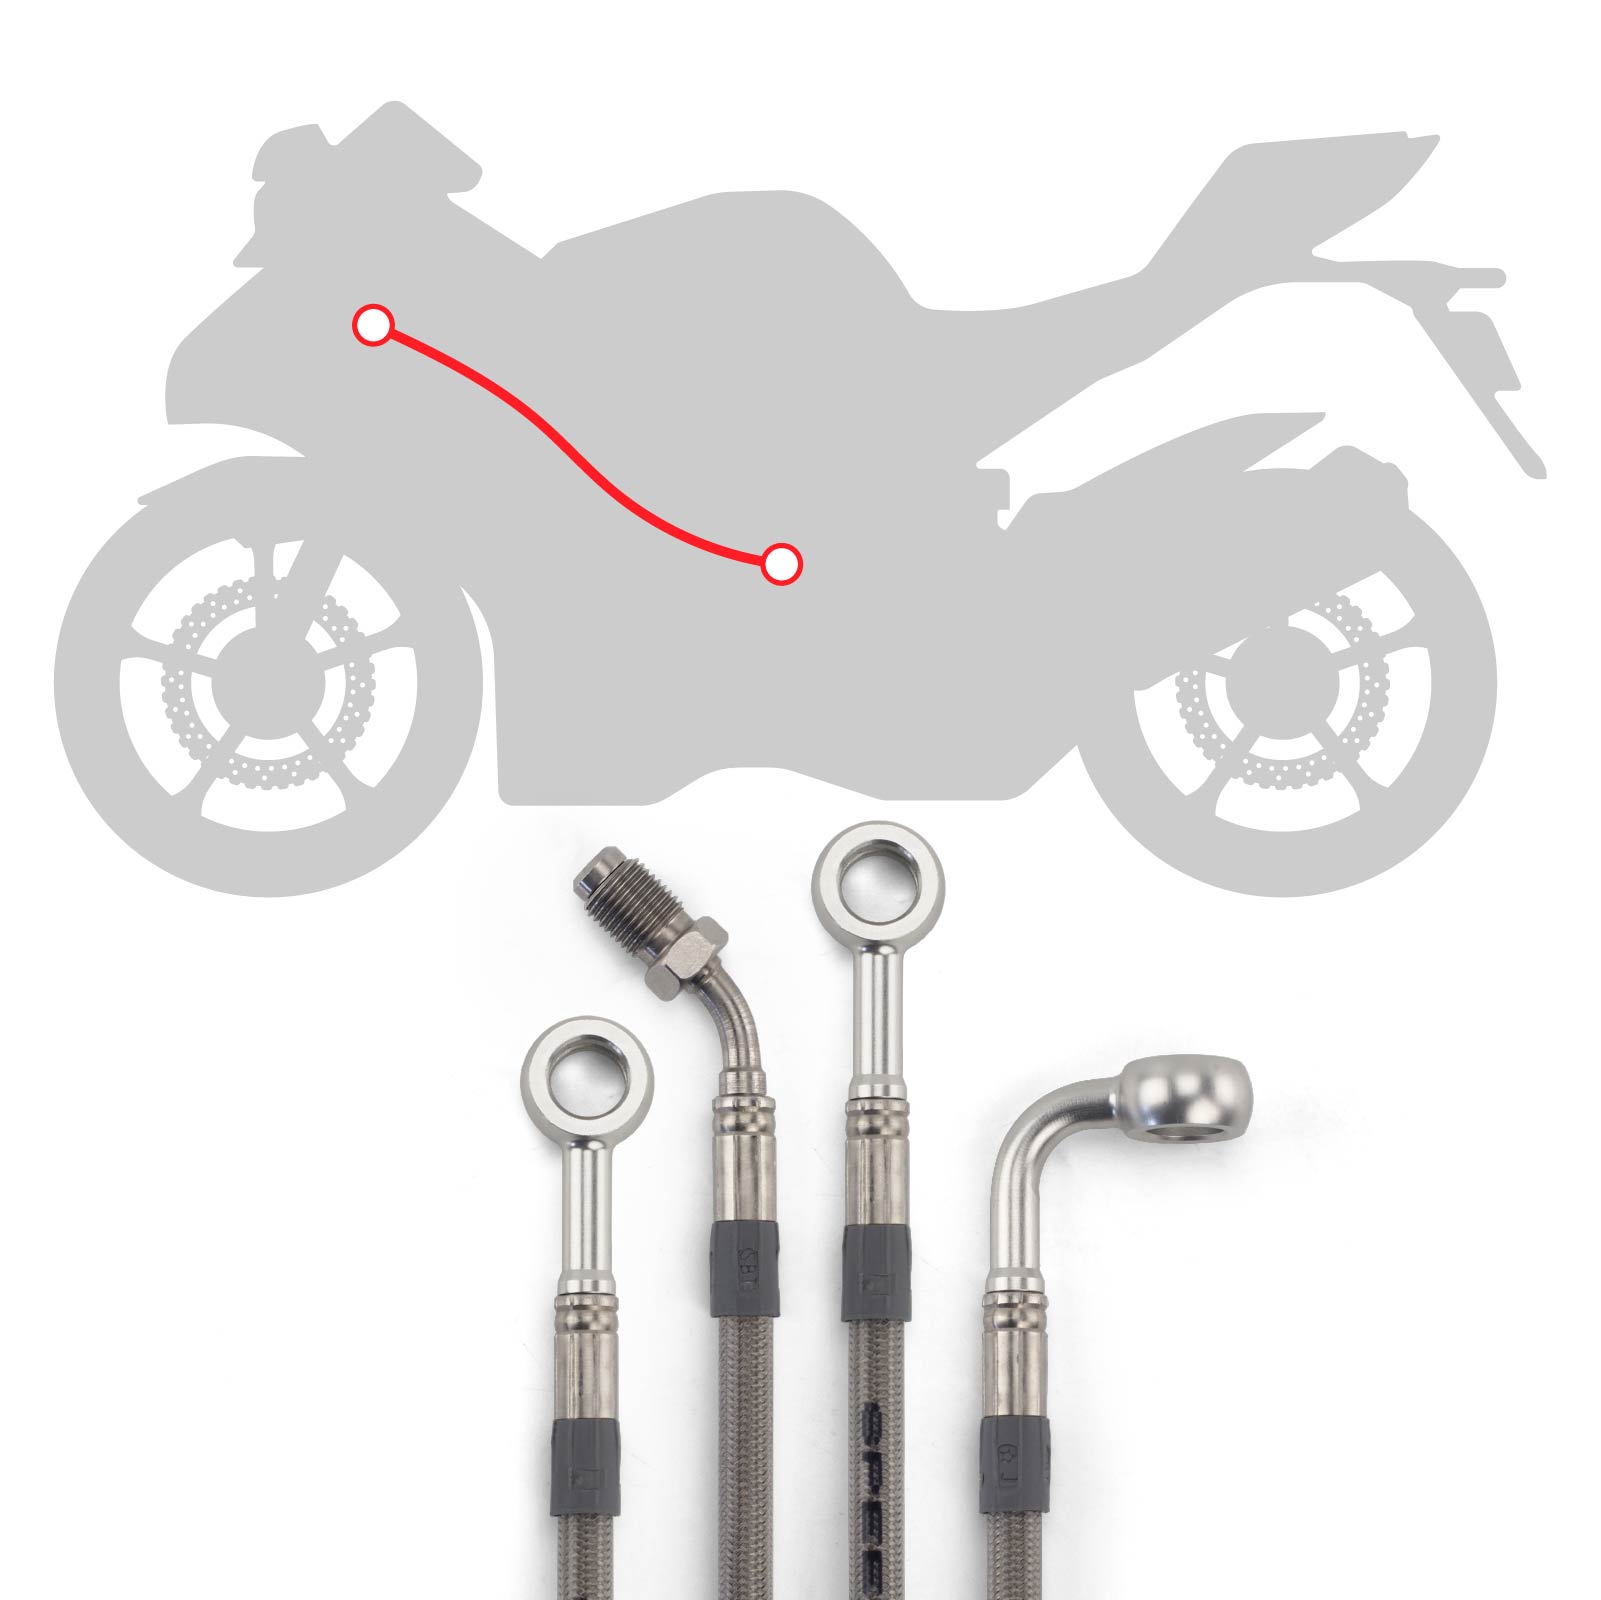 Raximo steel braided brake hose kit front installed like... for Model:  Kawasaki GPX 750 R ZX750F 1987-1988